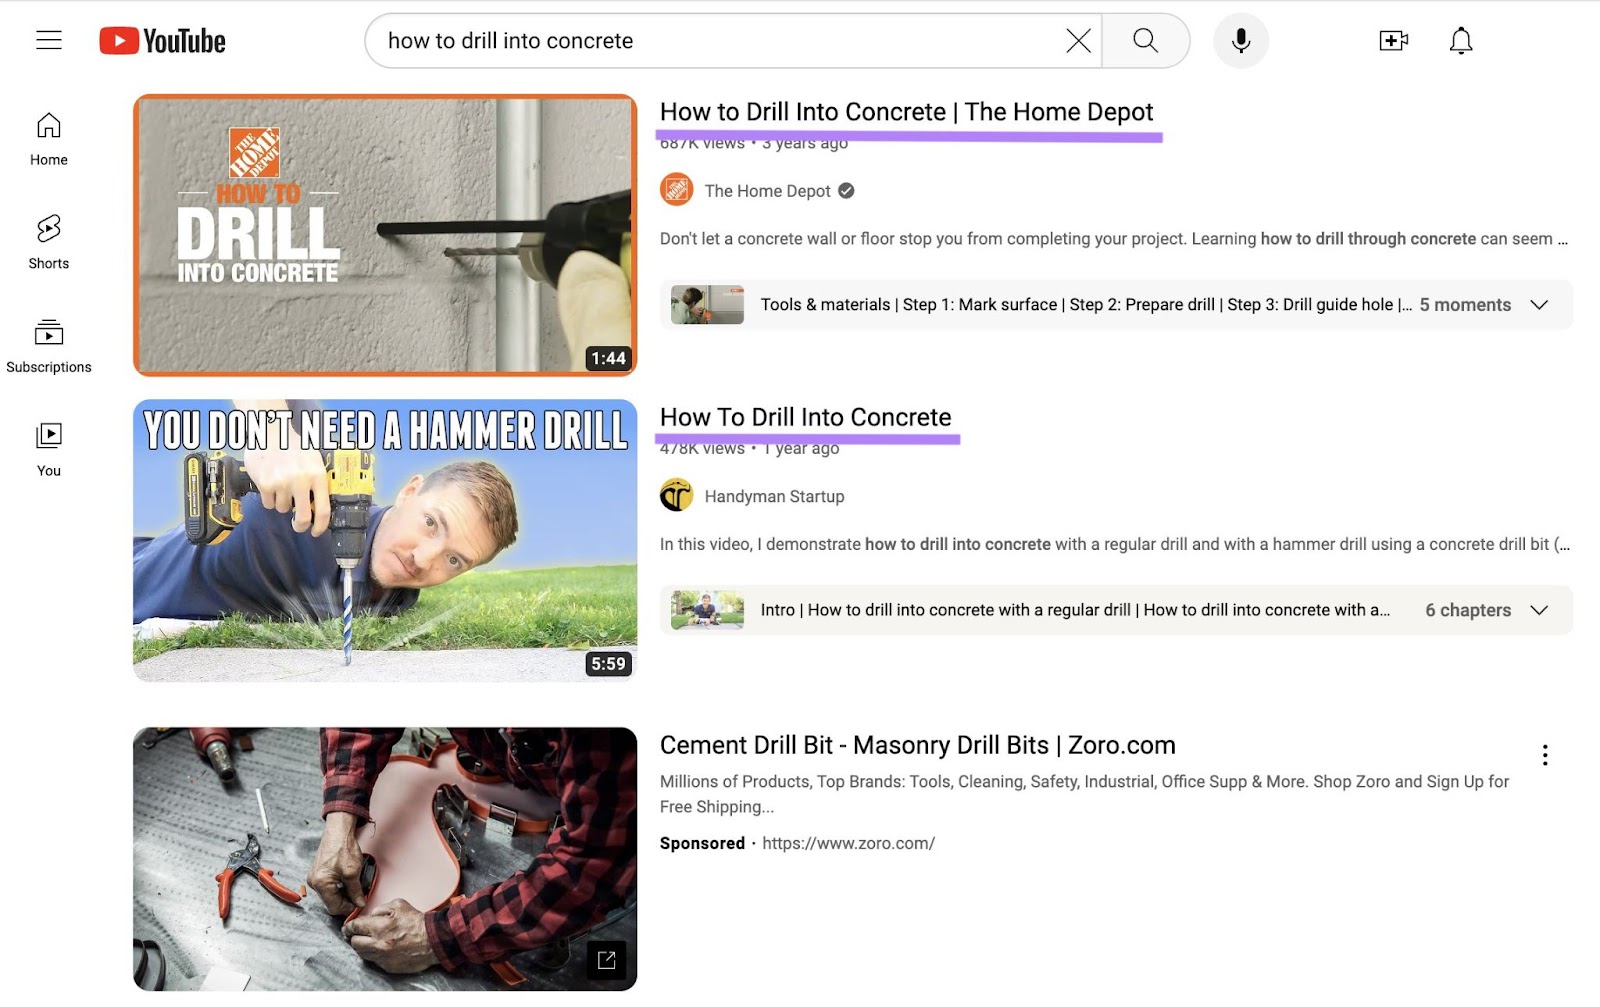 YouTube video titles highlighted in the results for "how to drill into concrete" search